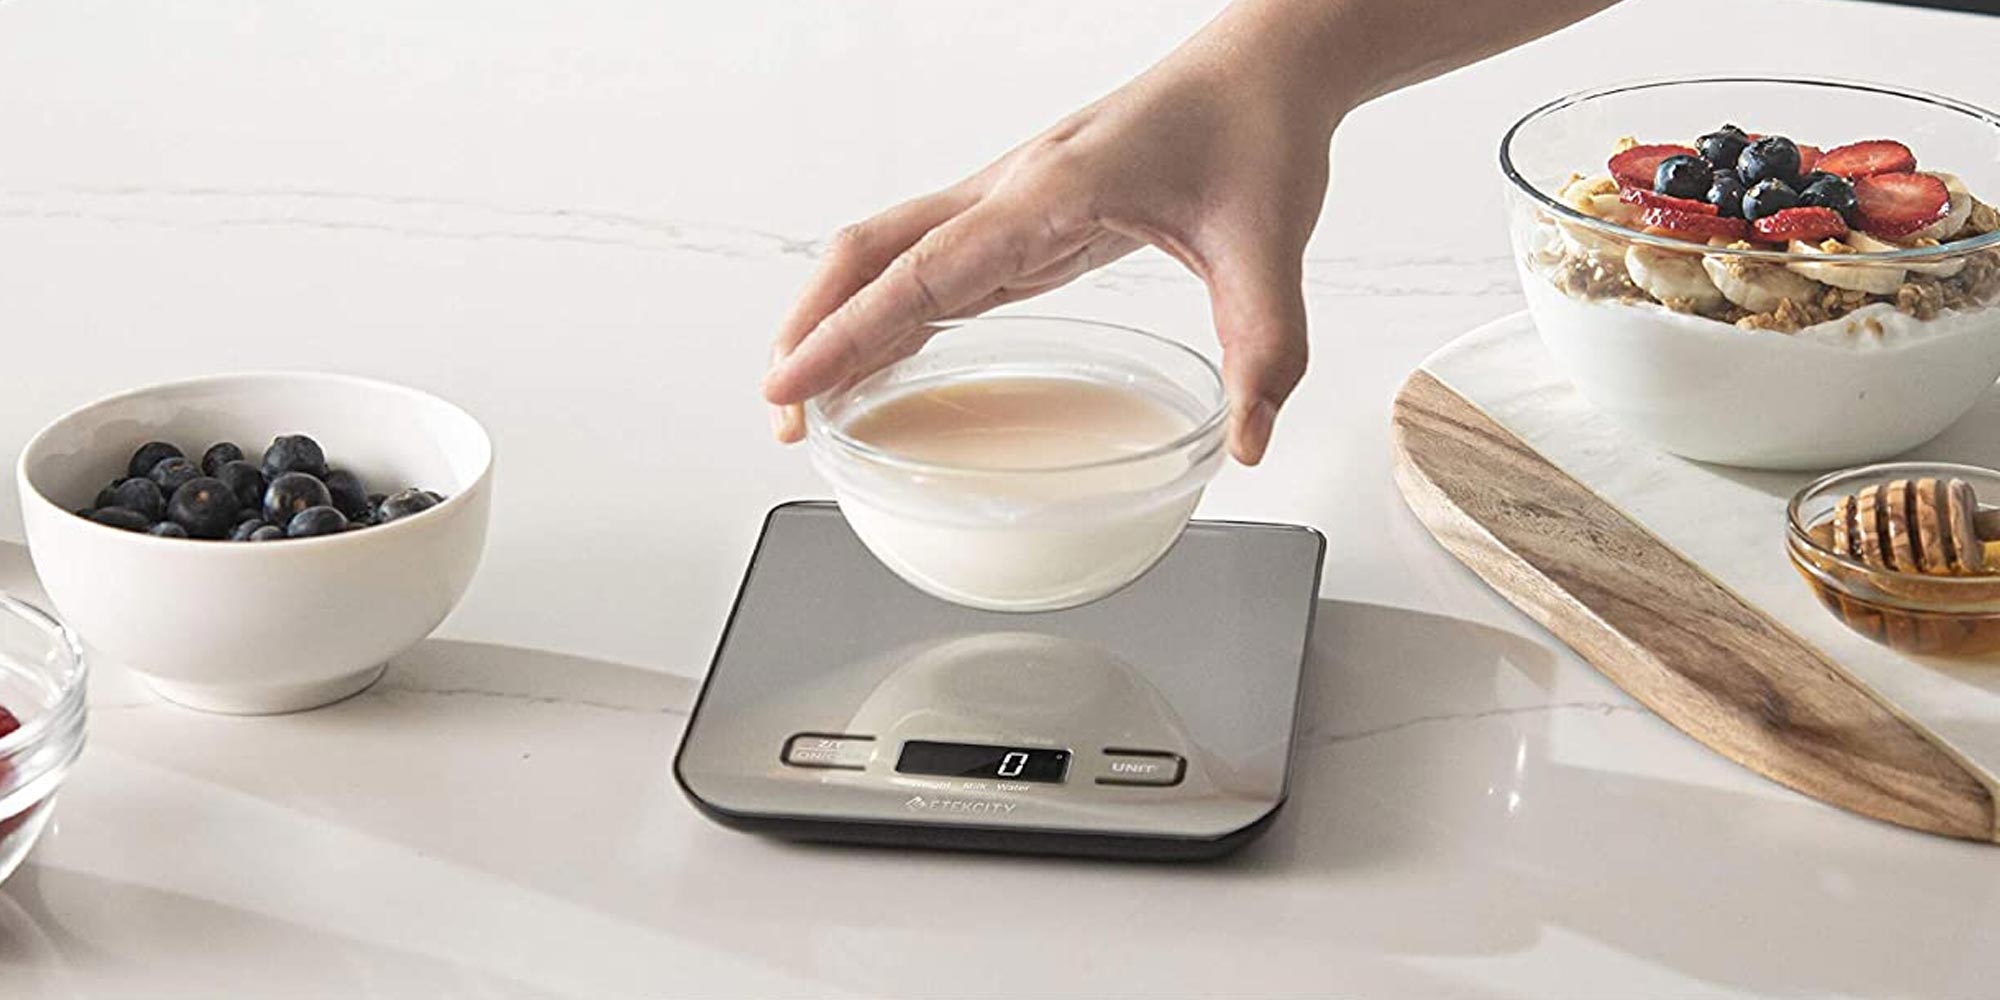 https://9to5toys.com/wp-content/uploads/sites/5/2021/02/etekcity-compact-kitchen-scale.jpg